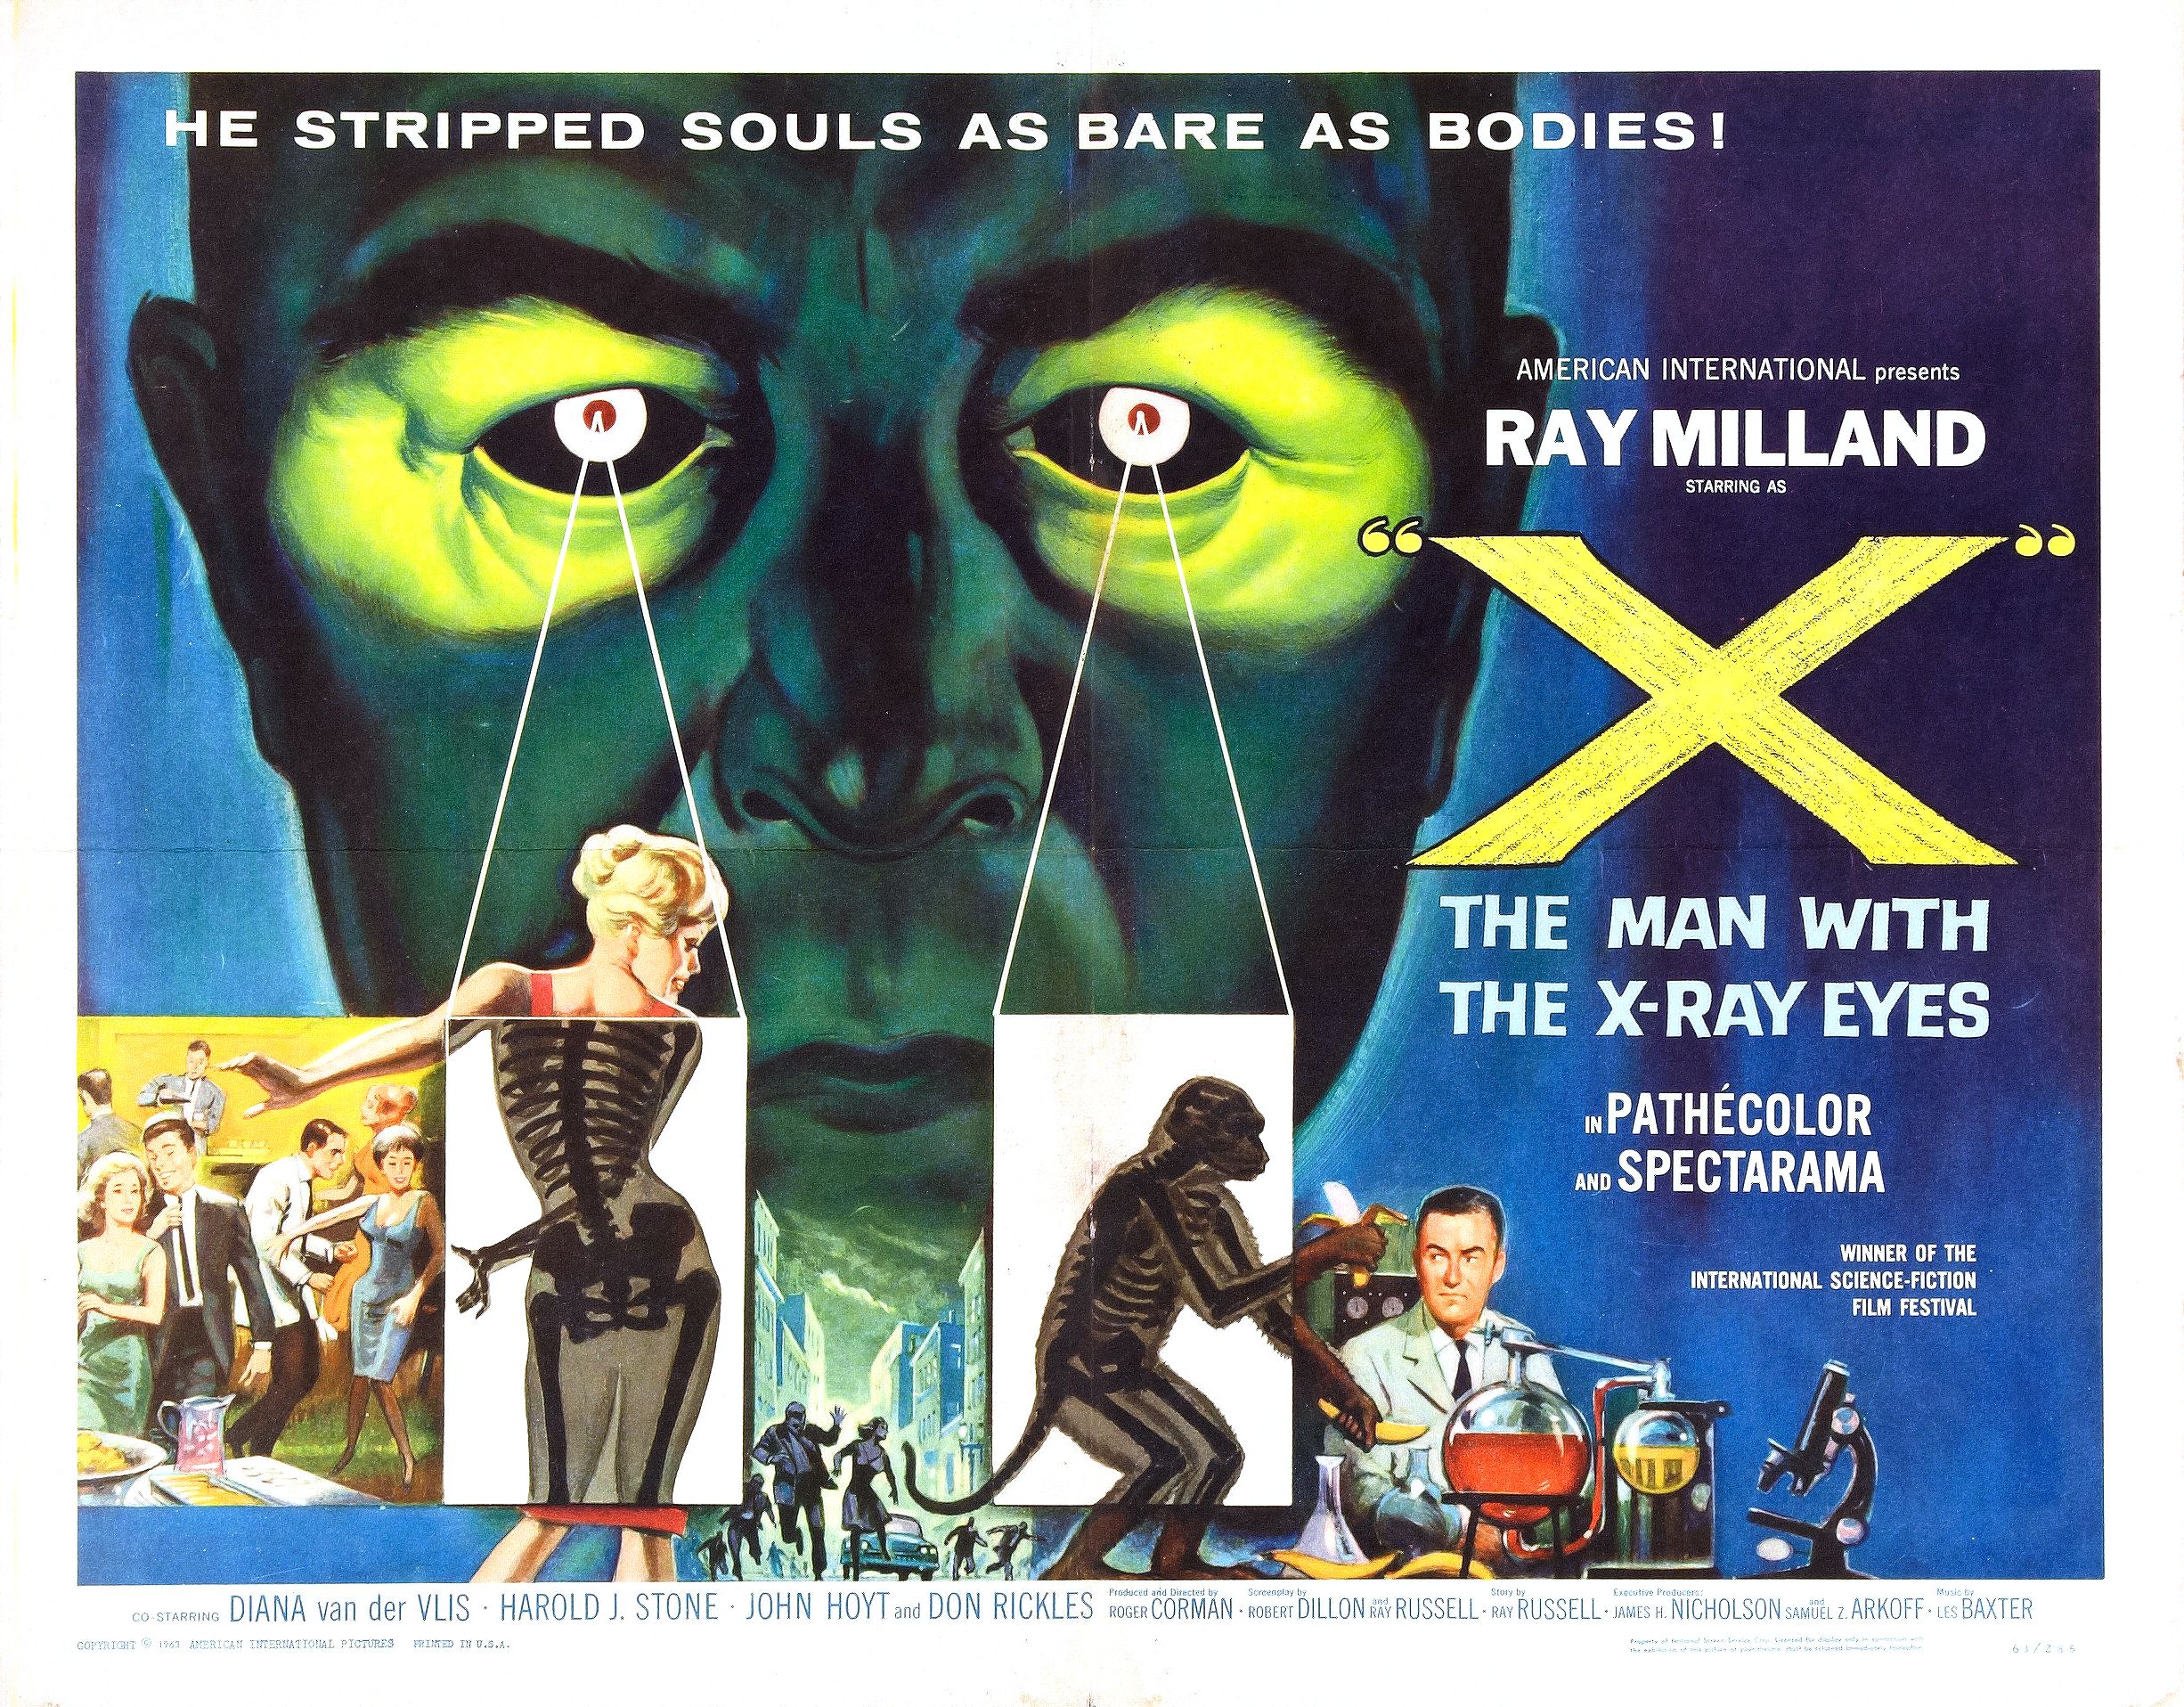 x the man with the x ray eyes movie poster - He Stripped Souls As Bare As Bodies American International presents Ray Milland The Man With The XRay Eyes Color Und Spectarama Internatoral ScenceFicos Flv Festival 1997 Diana van der Vlis Harold I Stone John 